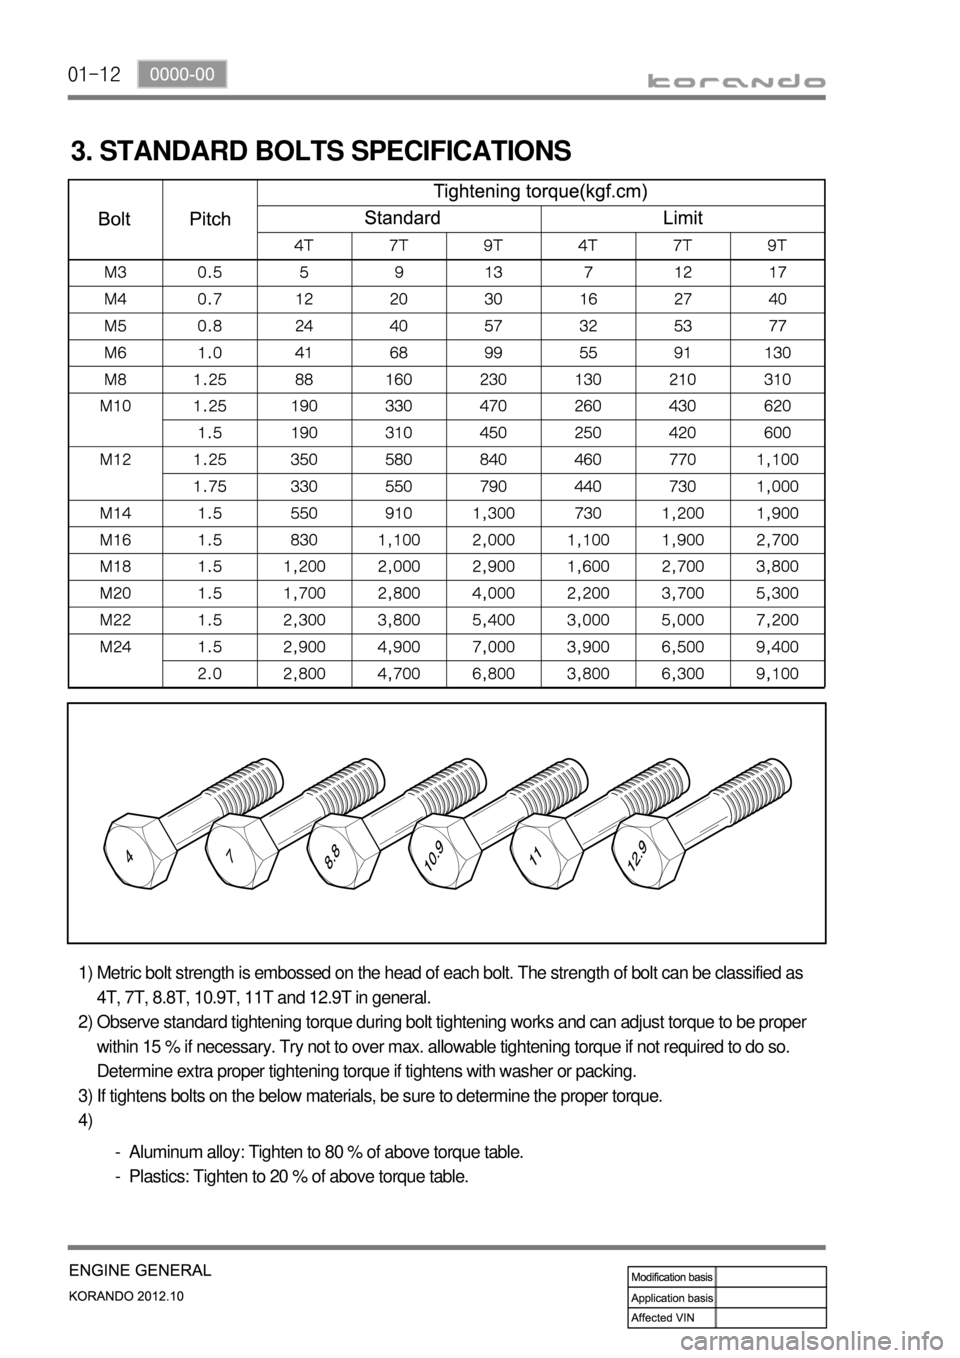 SSANGYONG KORANDO 2012  Service Manual 01-12
3. STANDARD BOLTS SPECIFICATIONS
Metric bolt strength is embossed on the head of each bolt. The strength of bolt can be classified as 
4T, 7T, 8.8T, 10.9T, 11T and 12.9T in general.
Observe stan